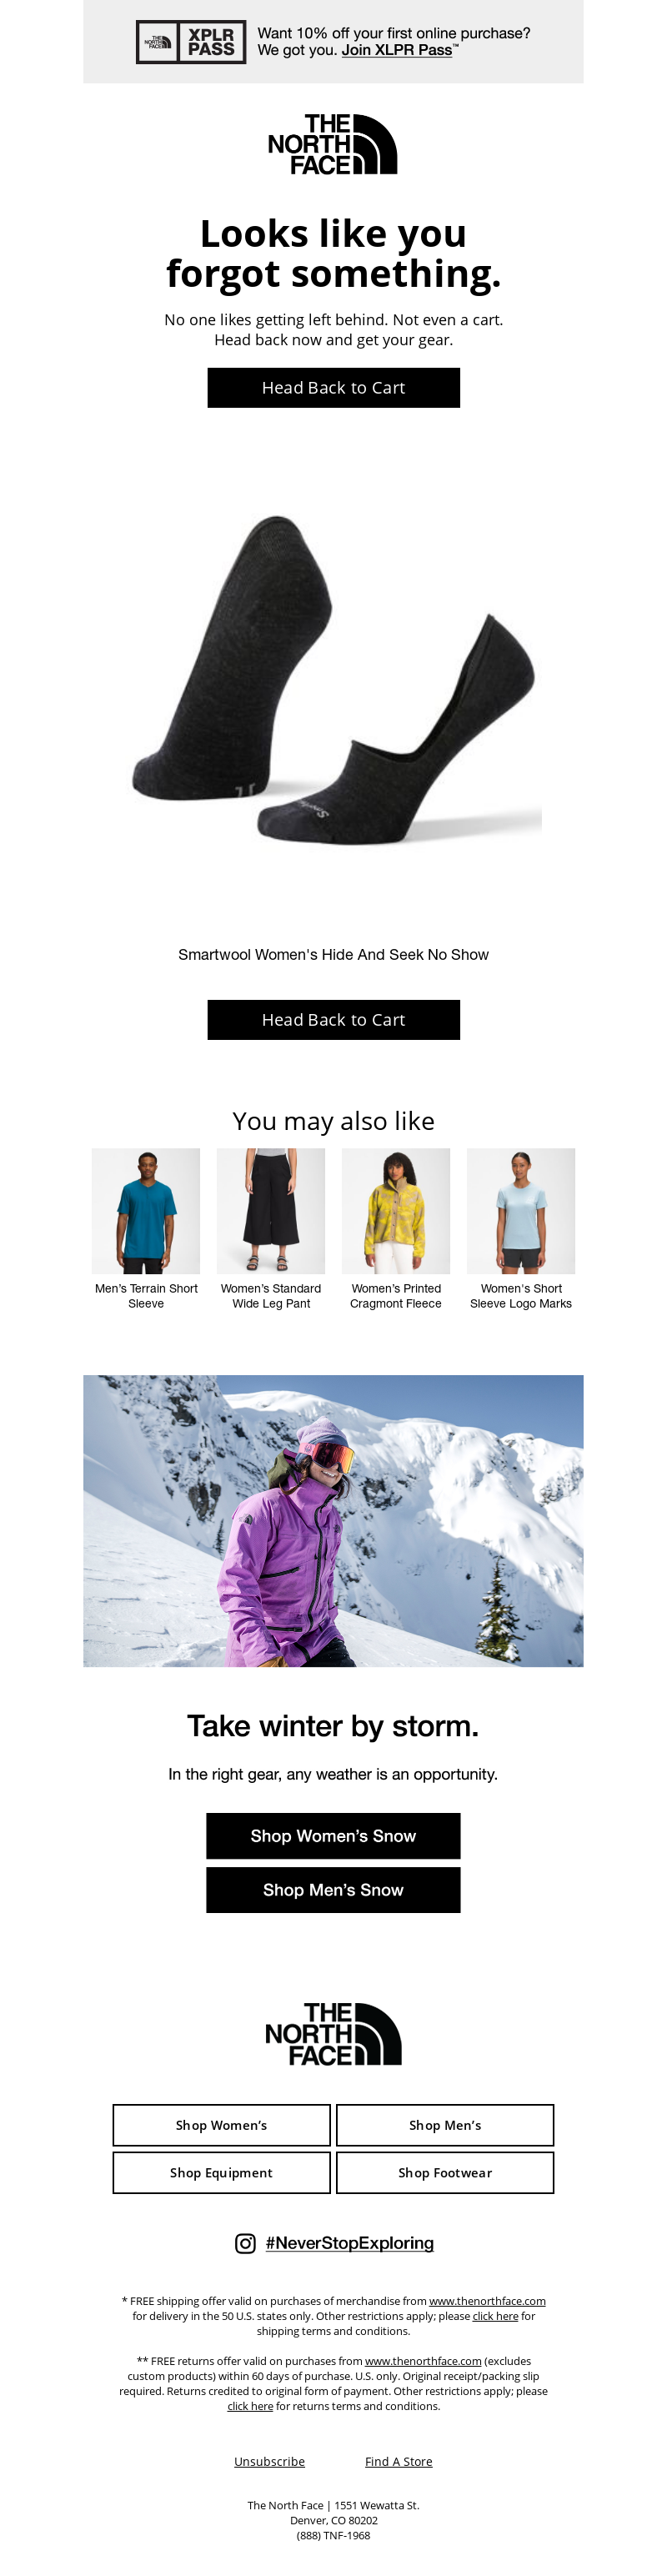 North Face Dynamic Content Personalization